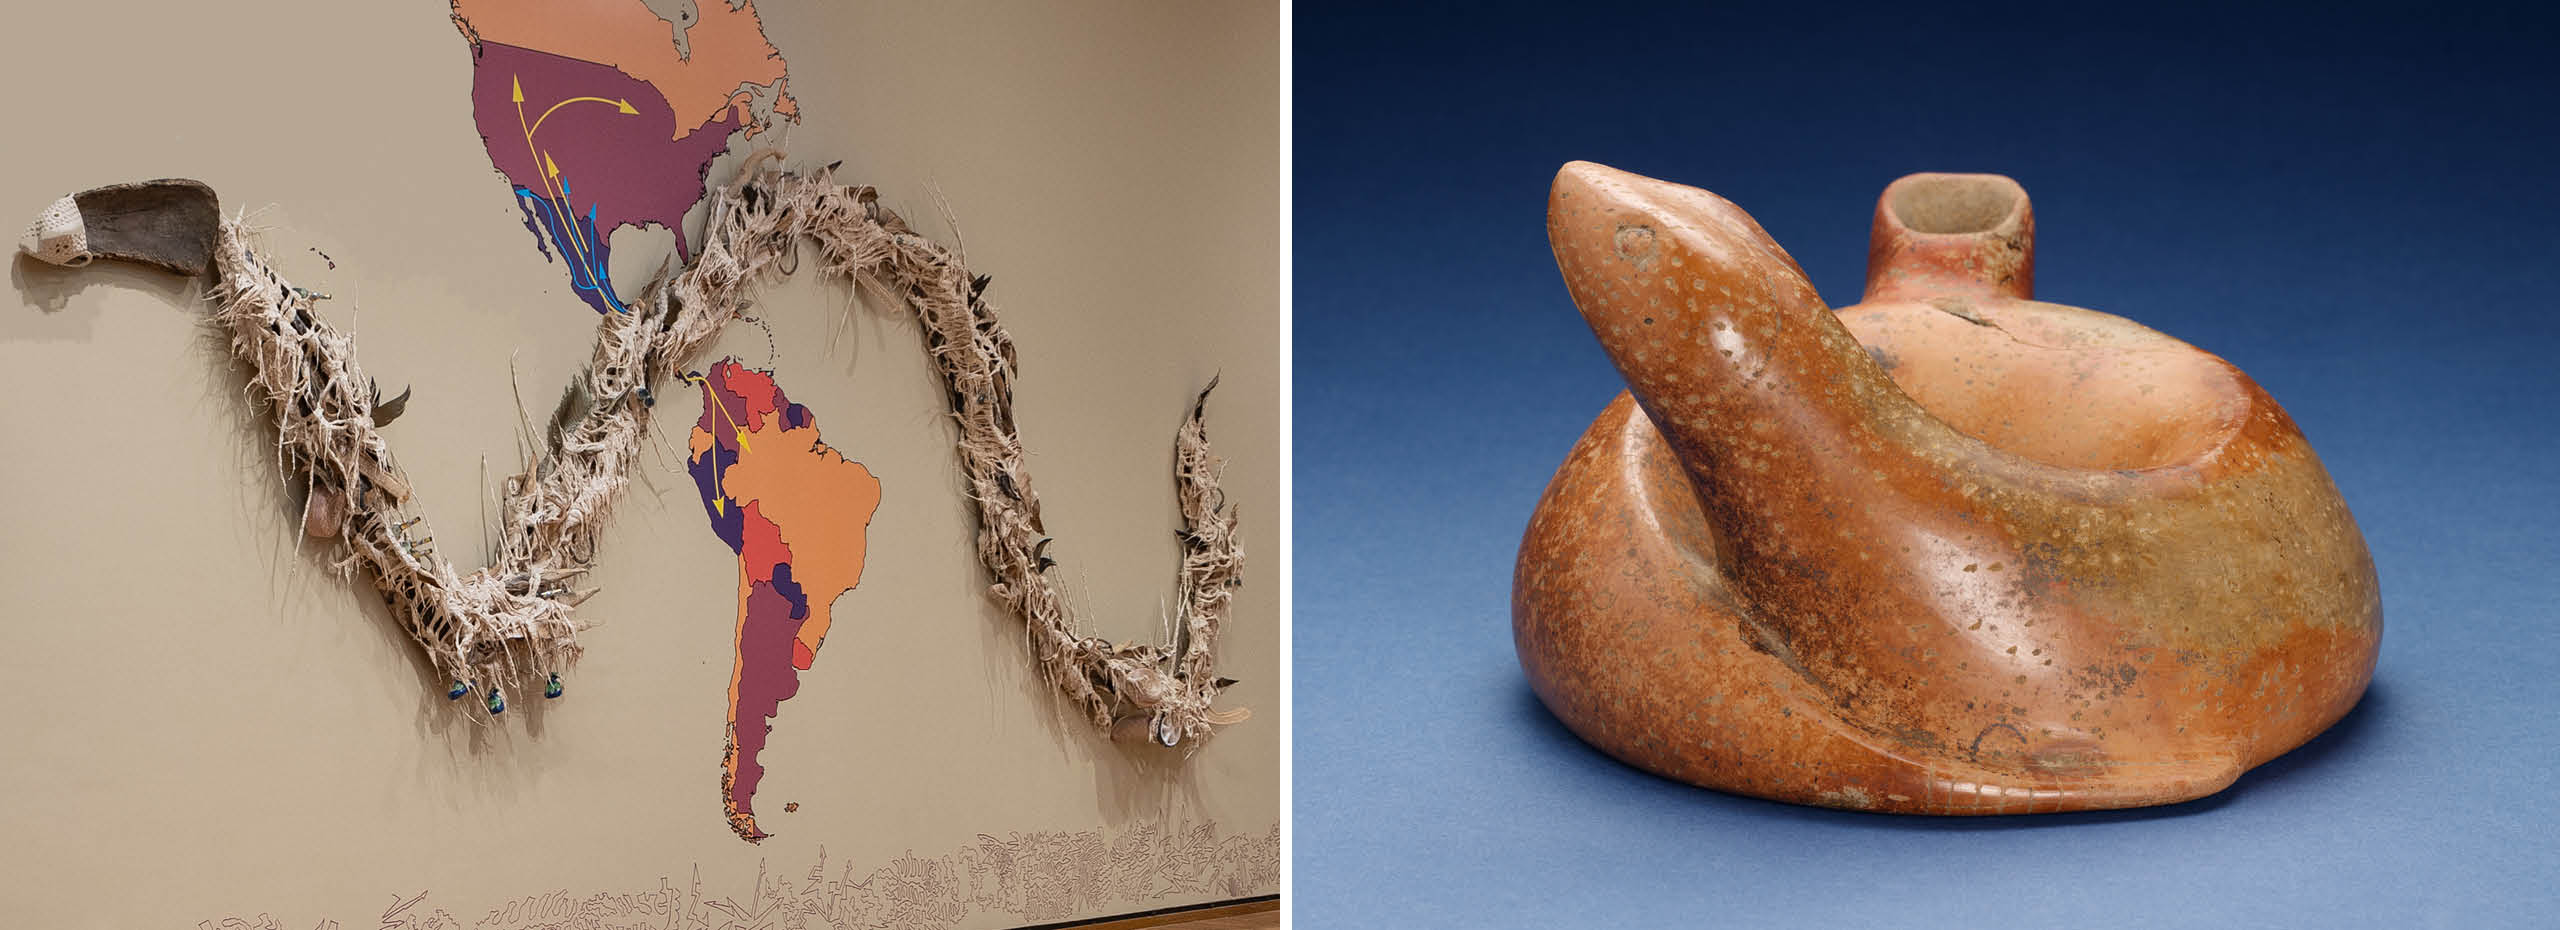 At left, a large snakelike sculpture hangs on a wall over a colorful map of North and South America. and at right, a small tan ceramic of a coiled snake figure